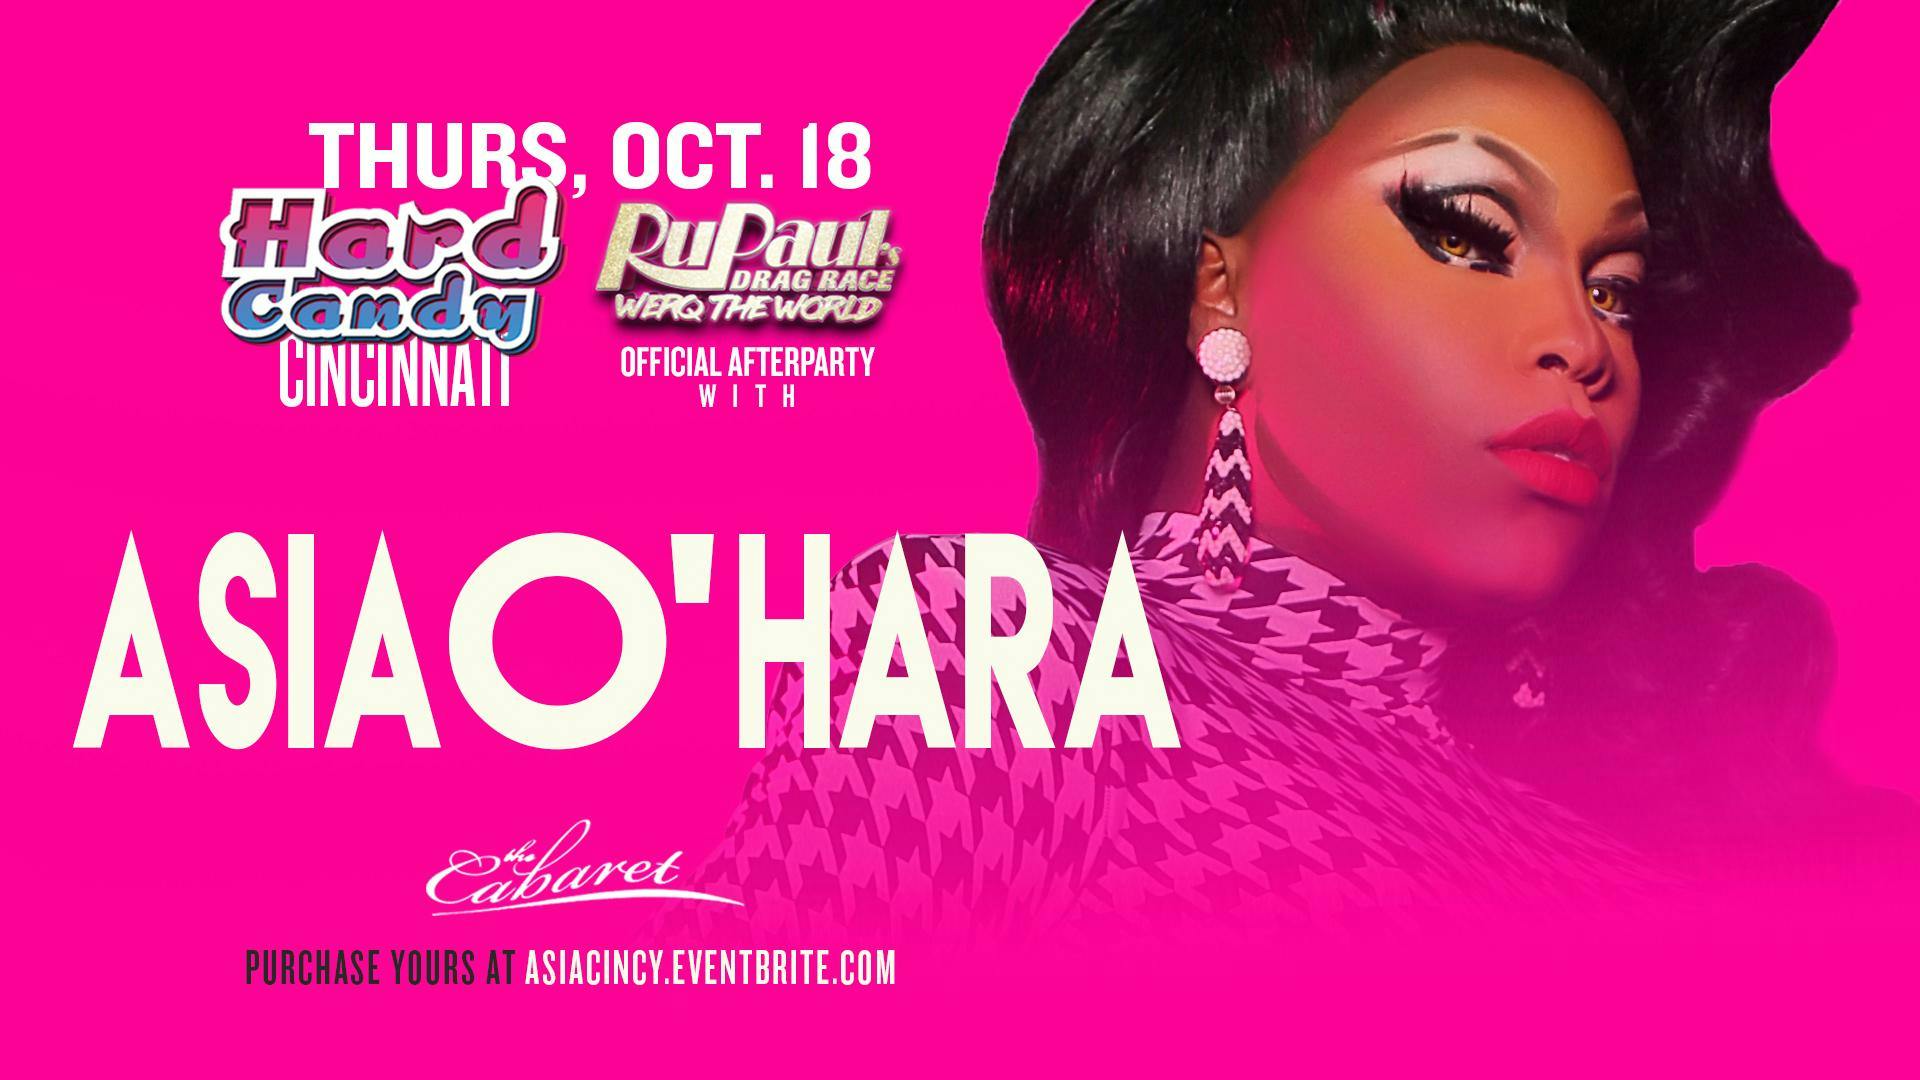 Hard Candy Cincinnati: Werq the World Afterparty with Asia O'Hara 